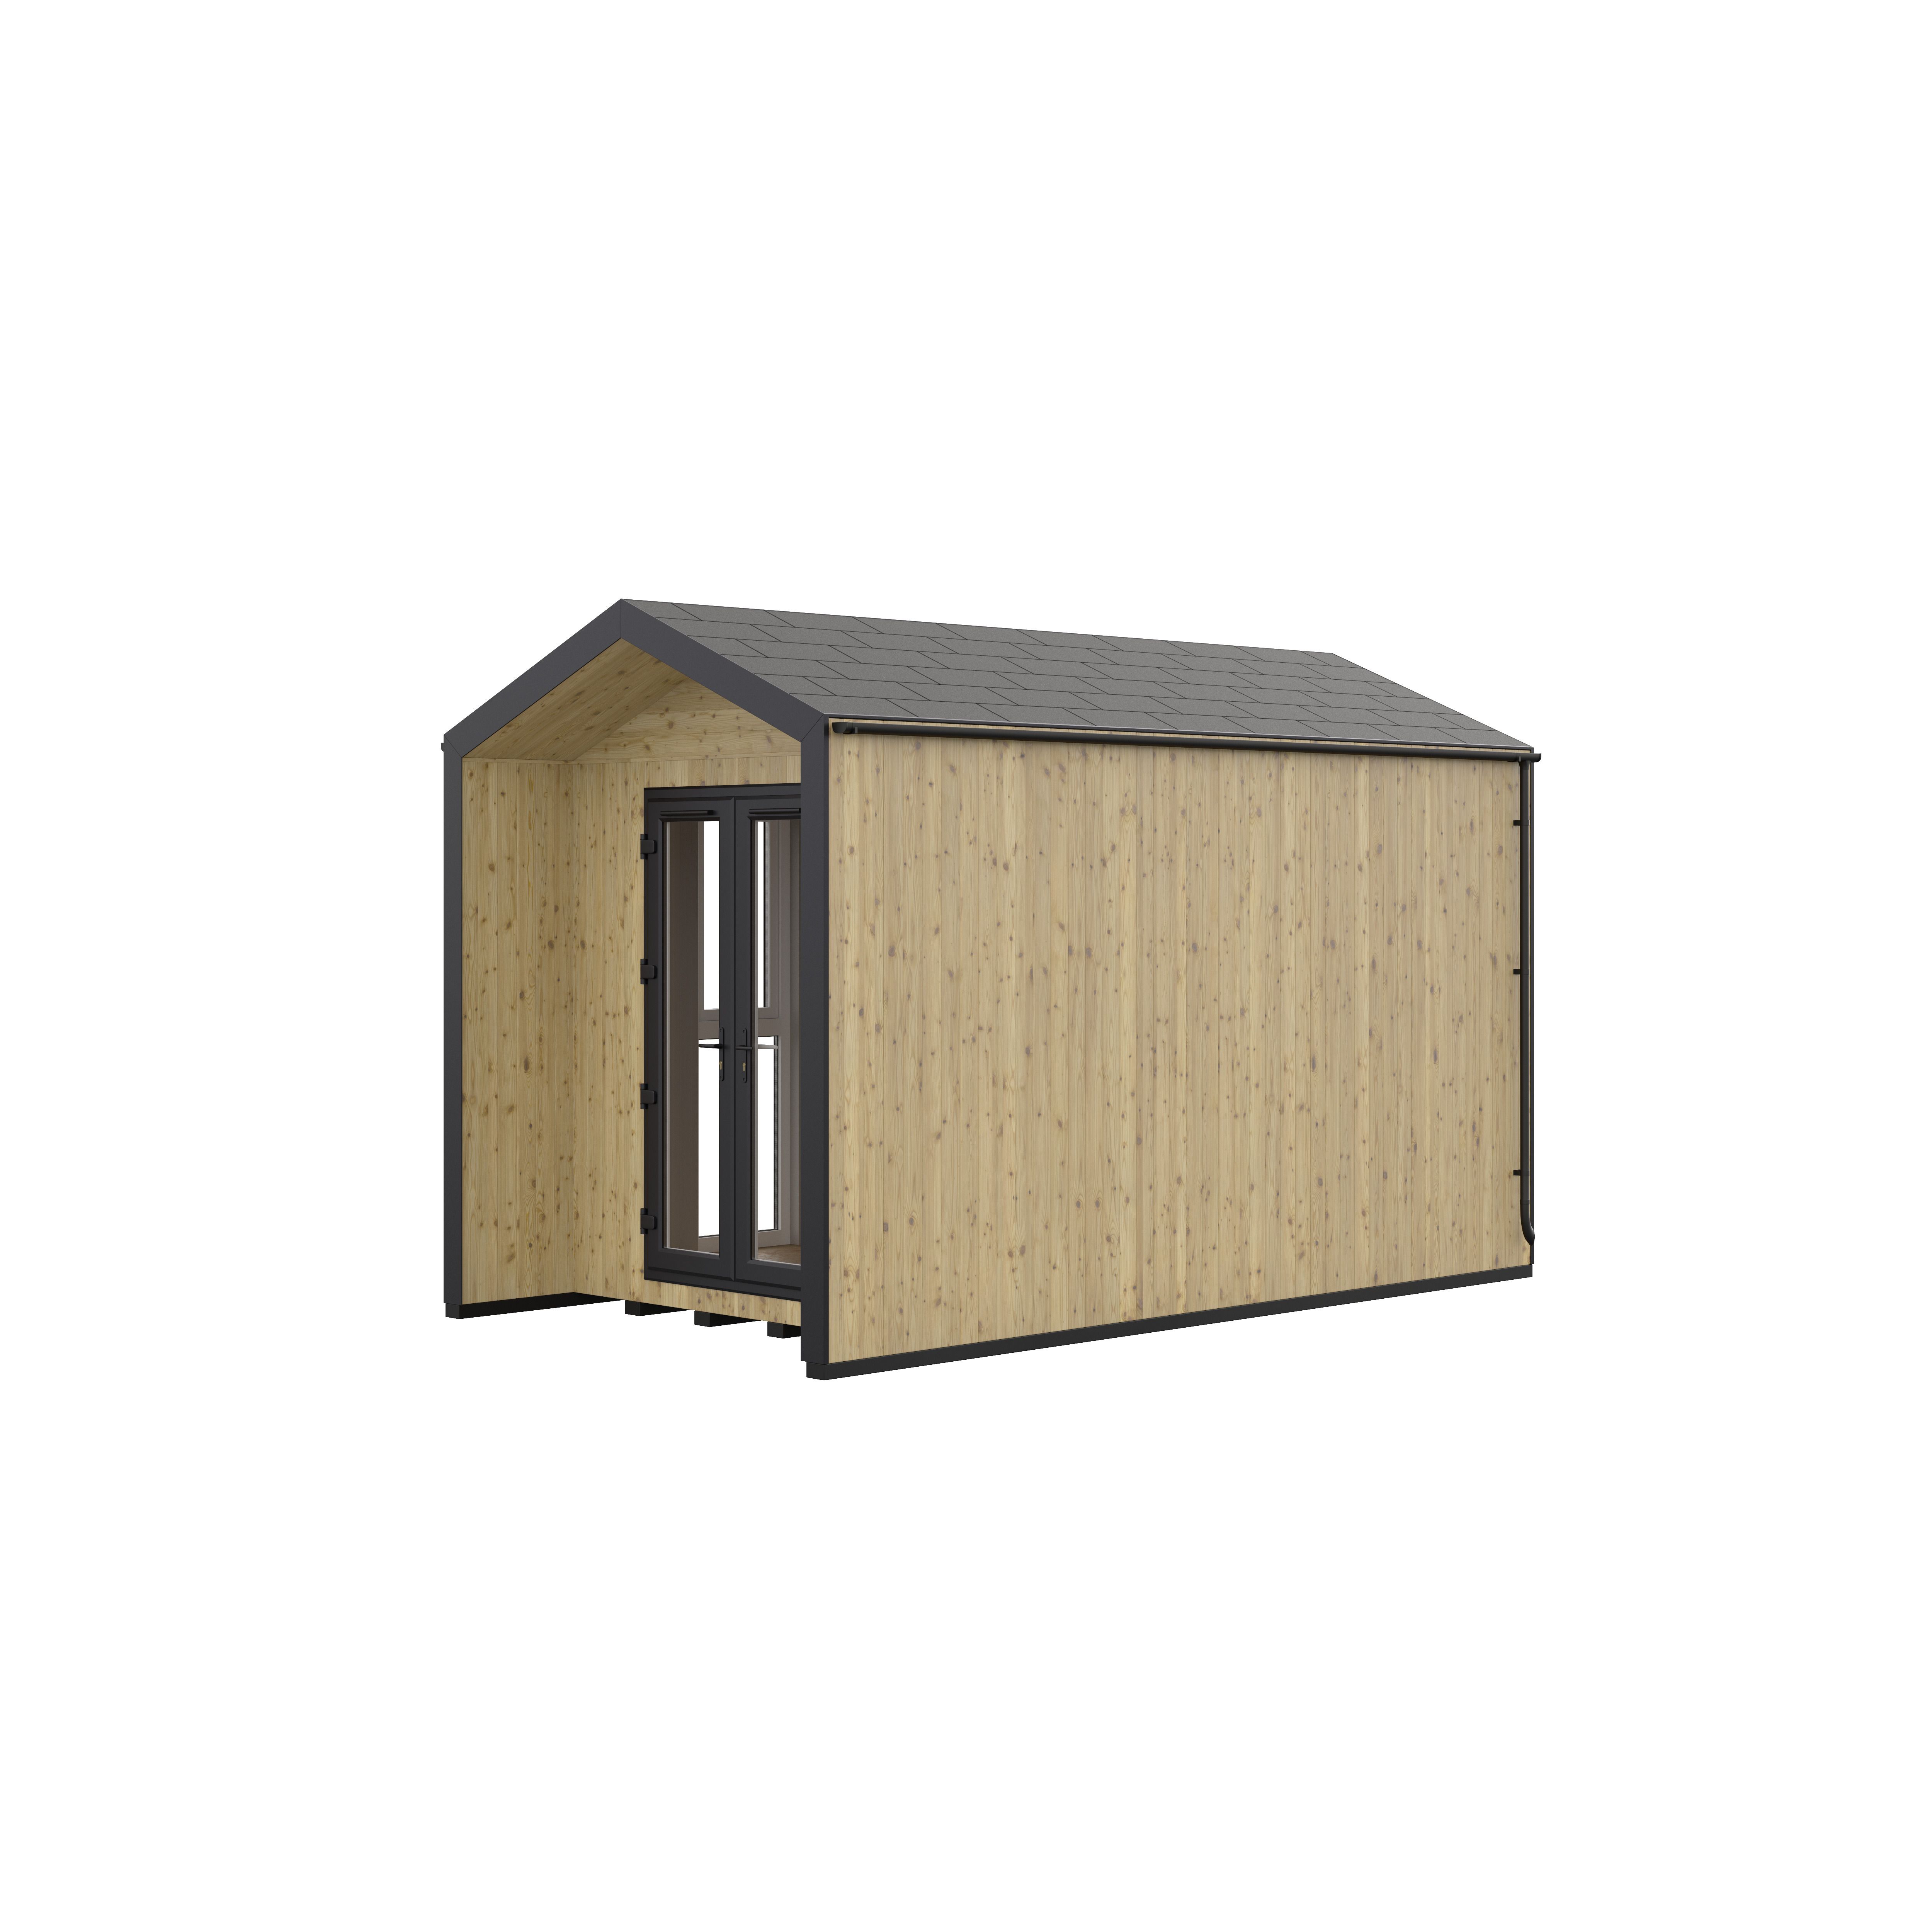 GoodHome Semora 8x14 ft with Double door Pitch Concrete Garden room 2.4m x 4.4m (Base included)